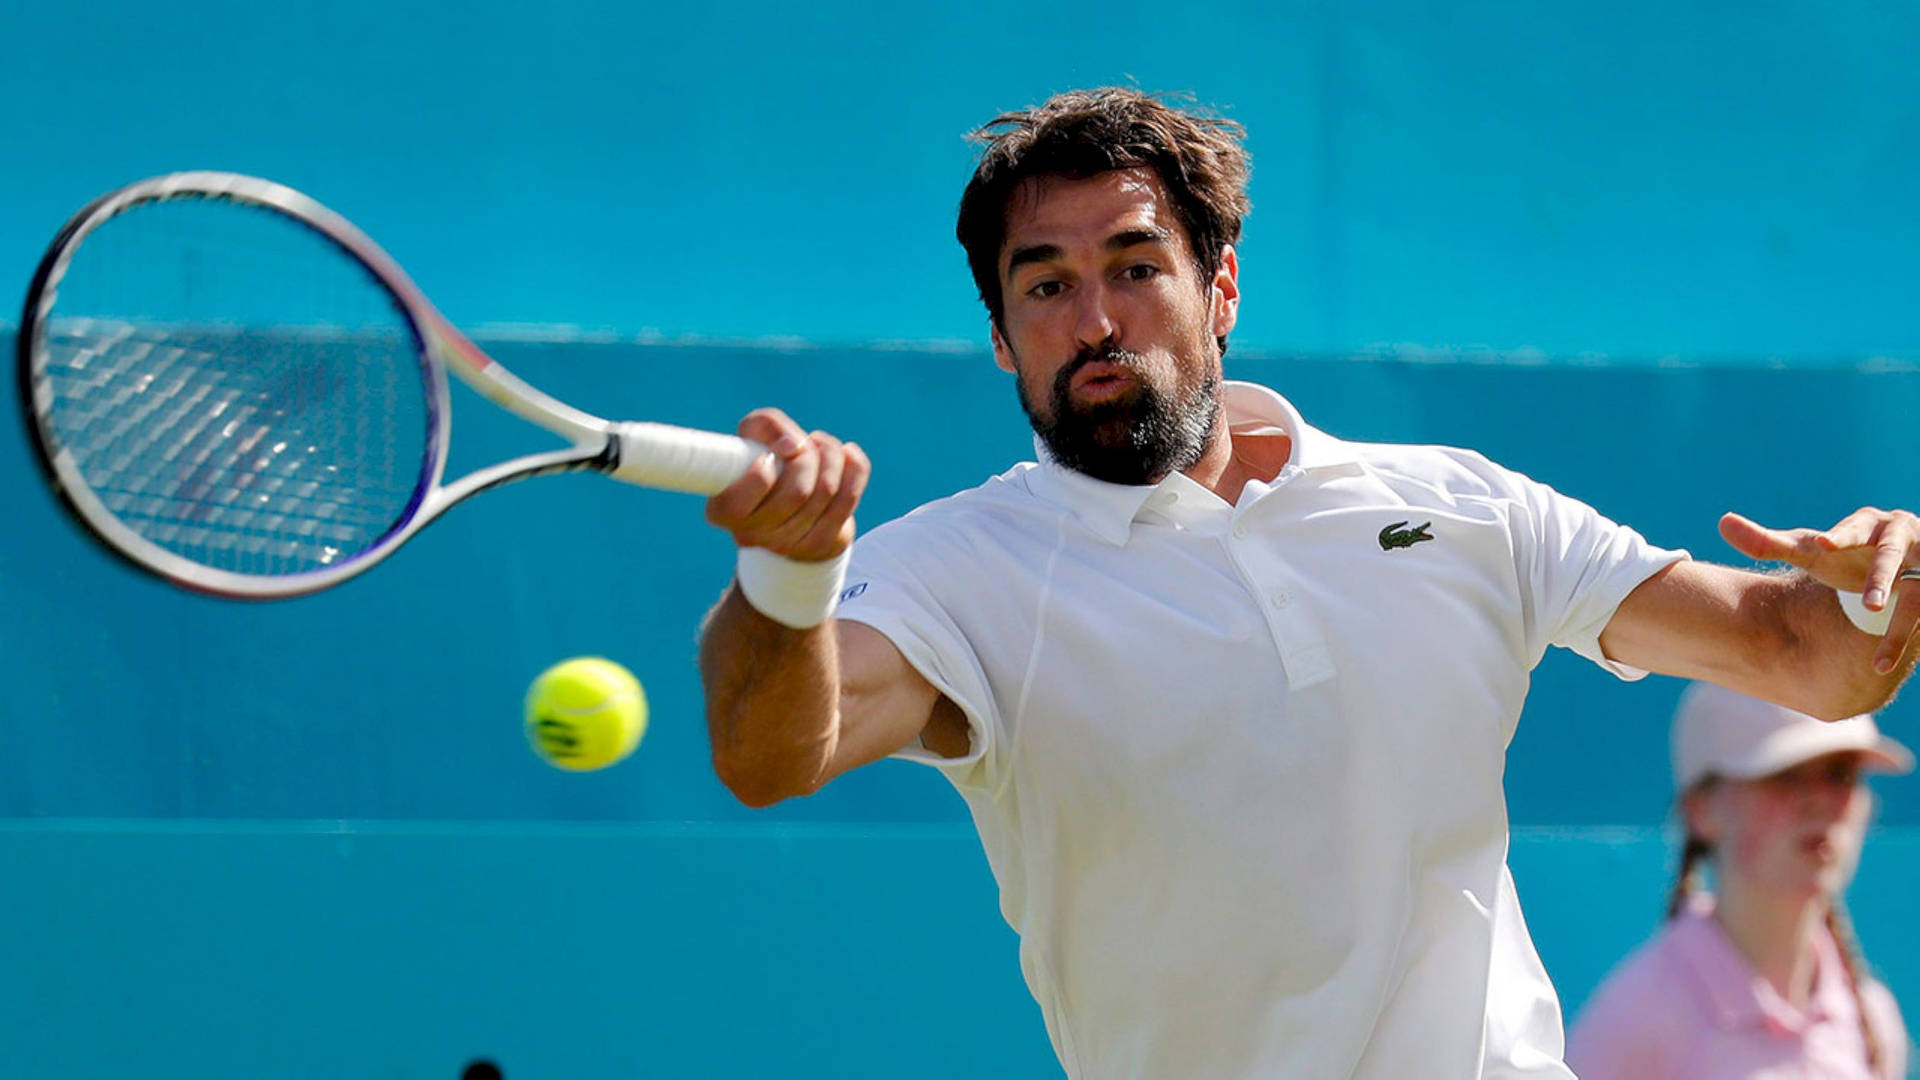 Jeremychardy Sträcker Sig Efter Bollen. (this Would Be A Caption For A Desktop Wallpaper Featuring A Photo Of Jeremy Chardy Playing Tennis And Reaching For A Ball) Wallpaper